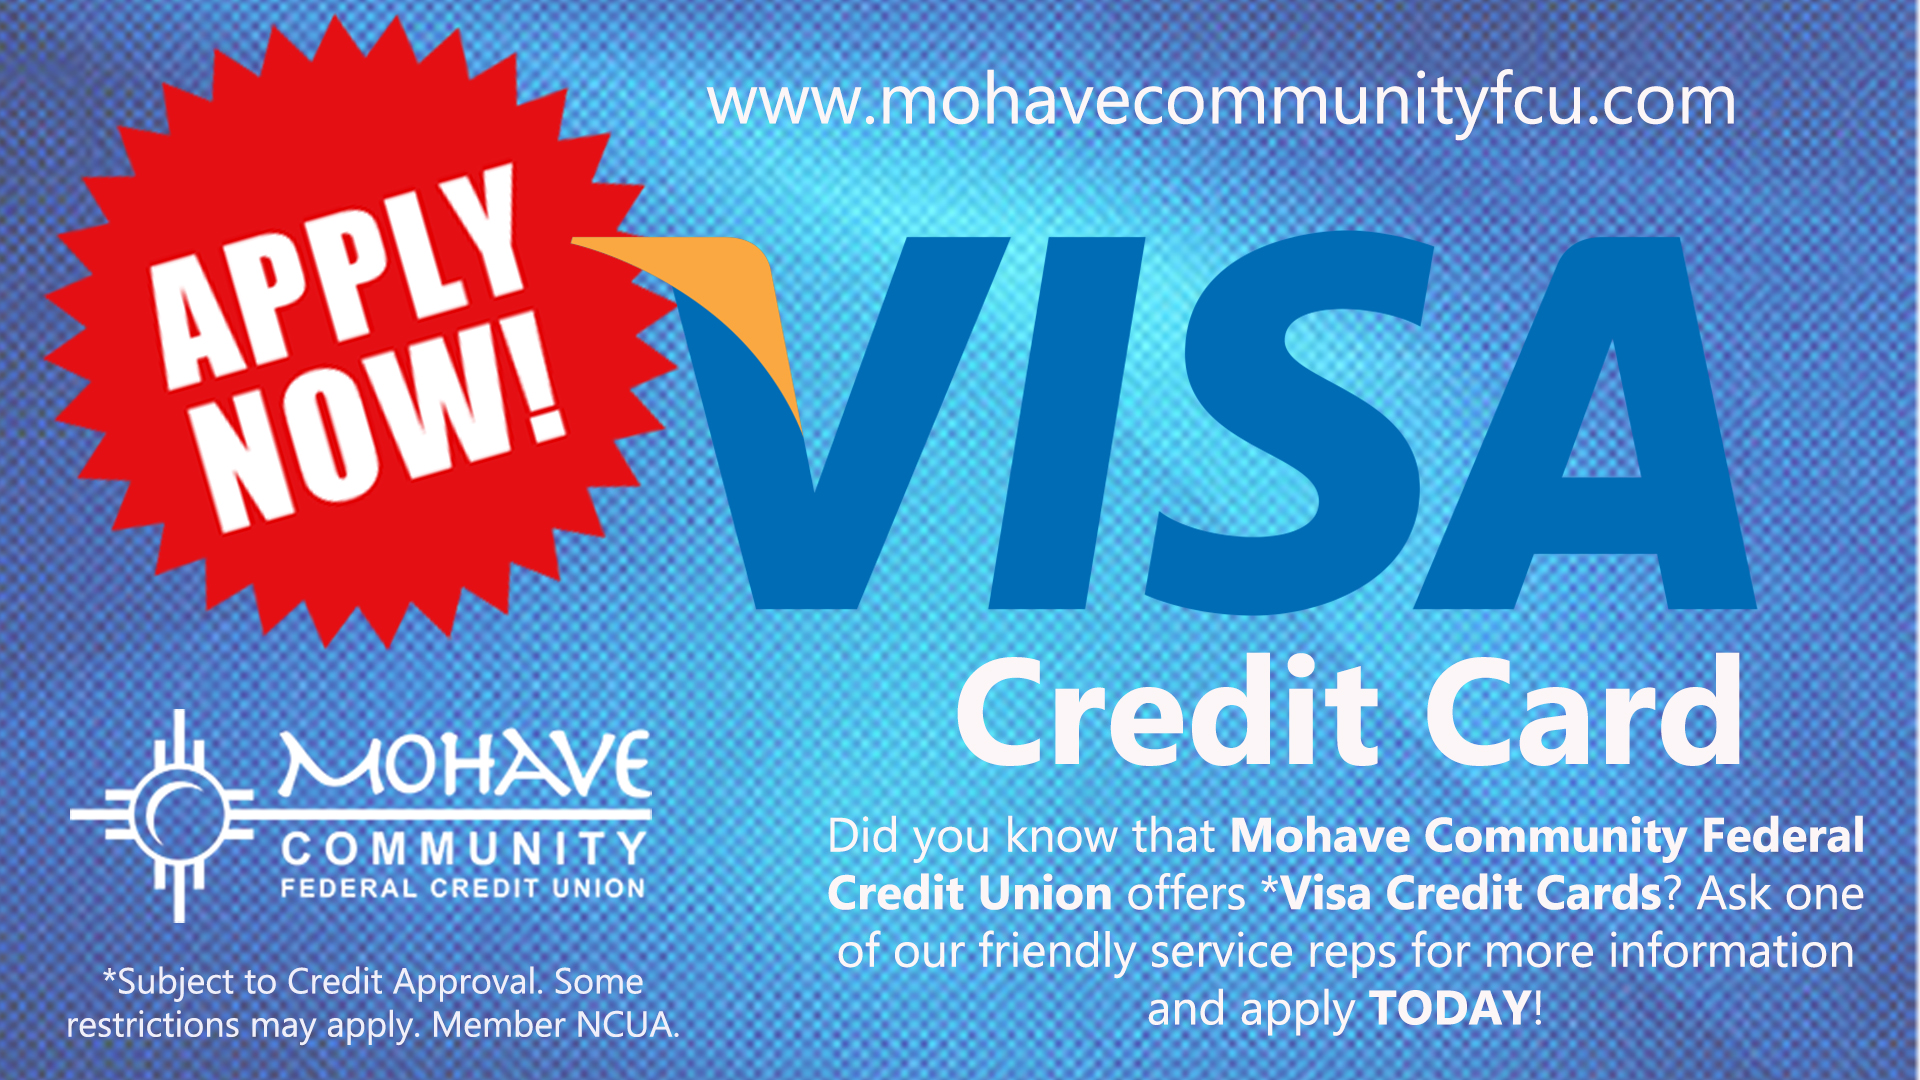 Apply now for our Visa Credit Card! Contact MCFCU at 928-753-8000 for more information!